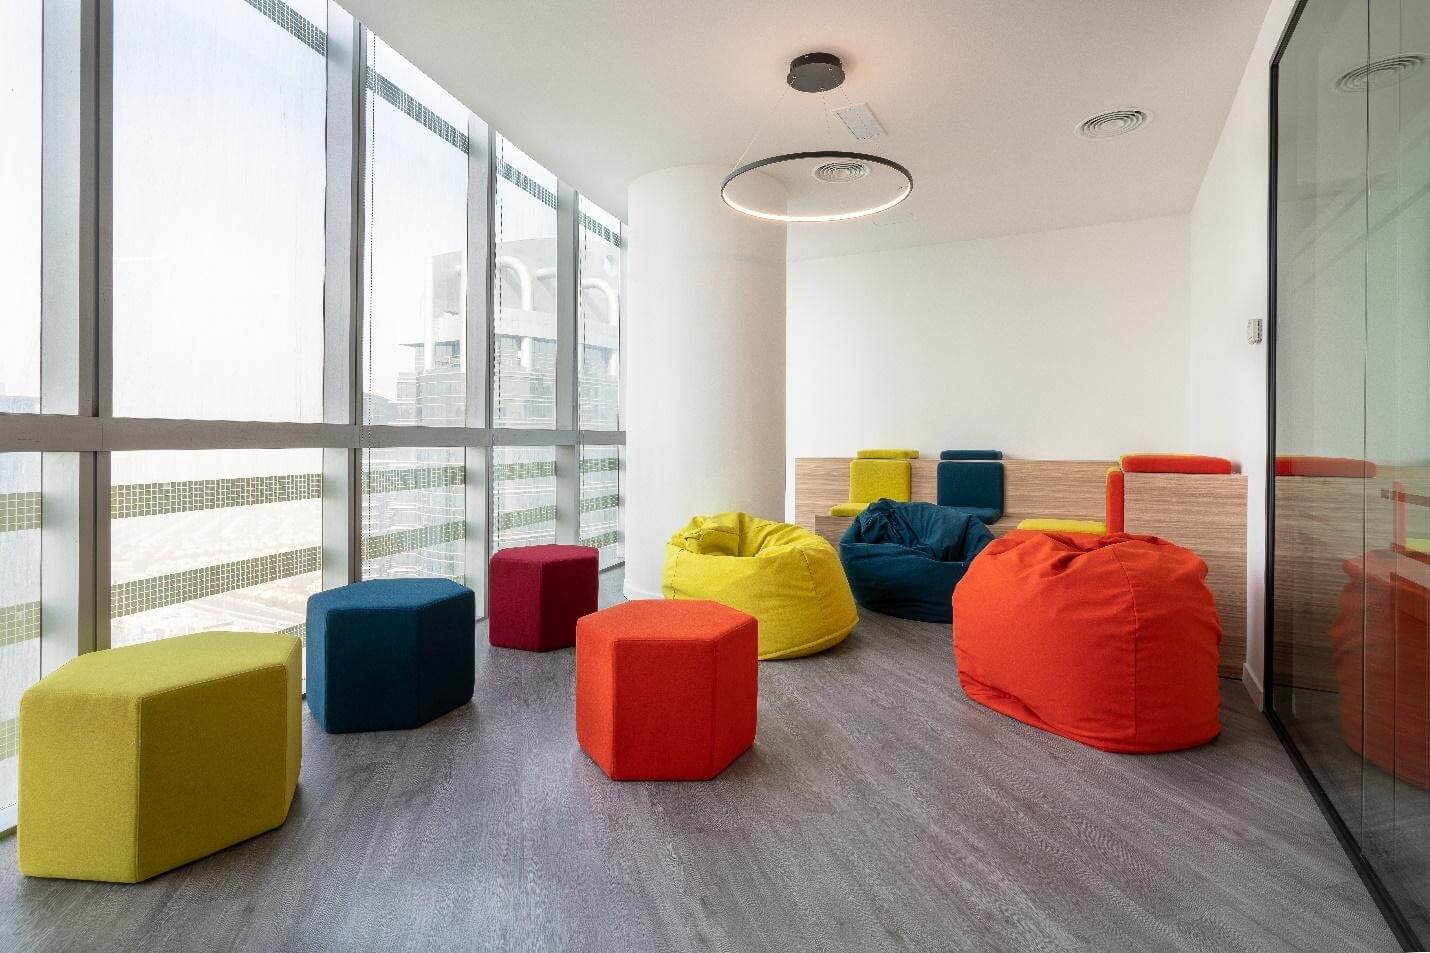 4 Creative Ideas To Use In Office Breakout Spaces - Motif UAE